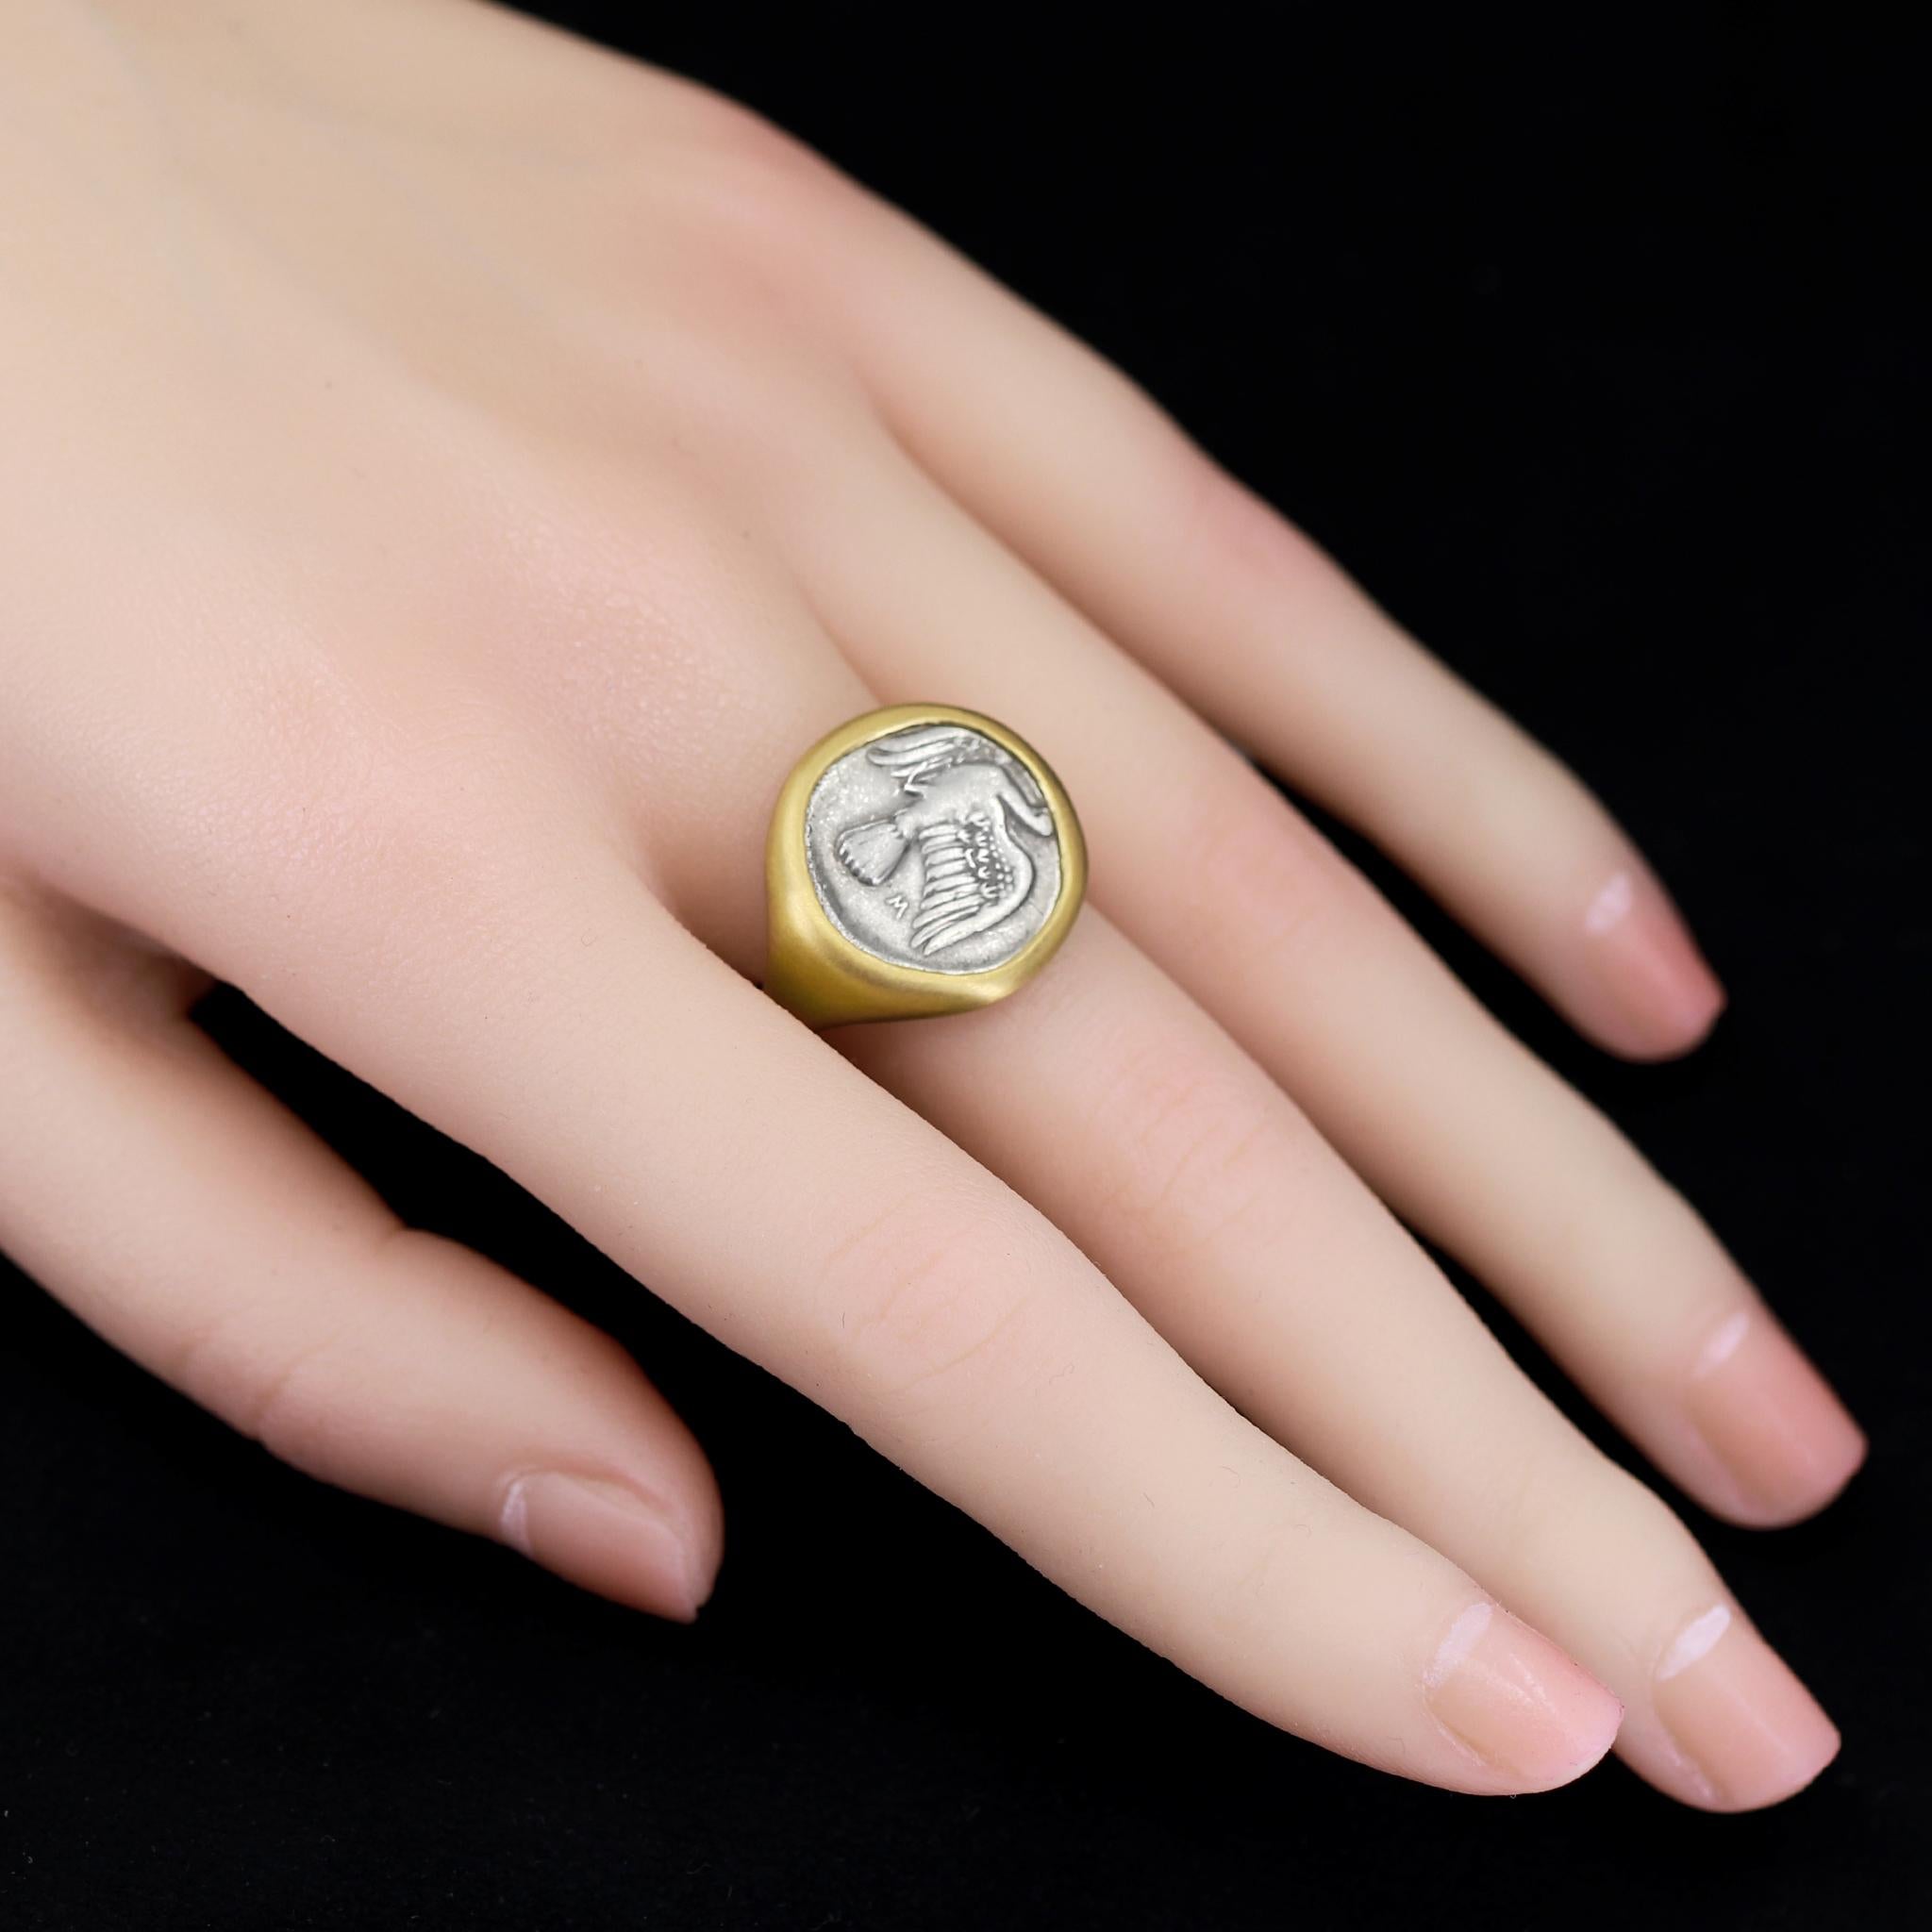 One of a Kind Ring hand-fabricated by jewelry maker Lola Brooks in signature-finished 22k yellow gold showcasing a rare, ancient Greek silver coin with a Sikyon Dove on the obverse side and a Chimera on the reverse side. The coin is in excellent